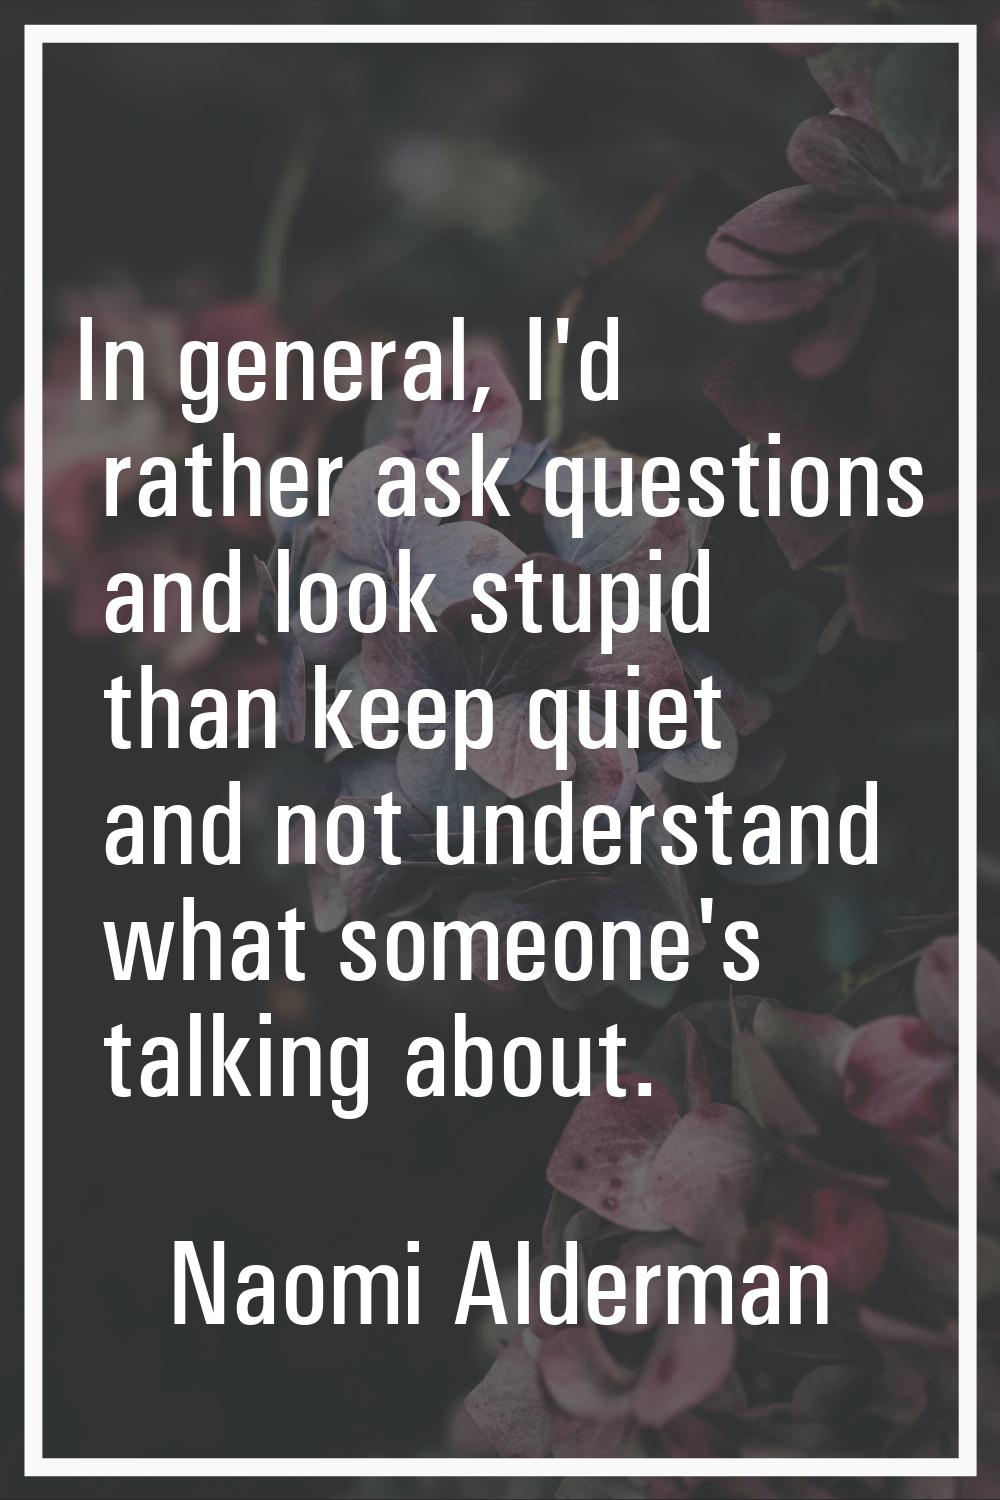 In general, I'd rather ask questions and look stupid than keep quiet and not understand what someon